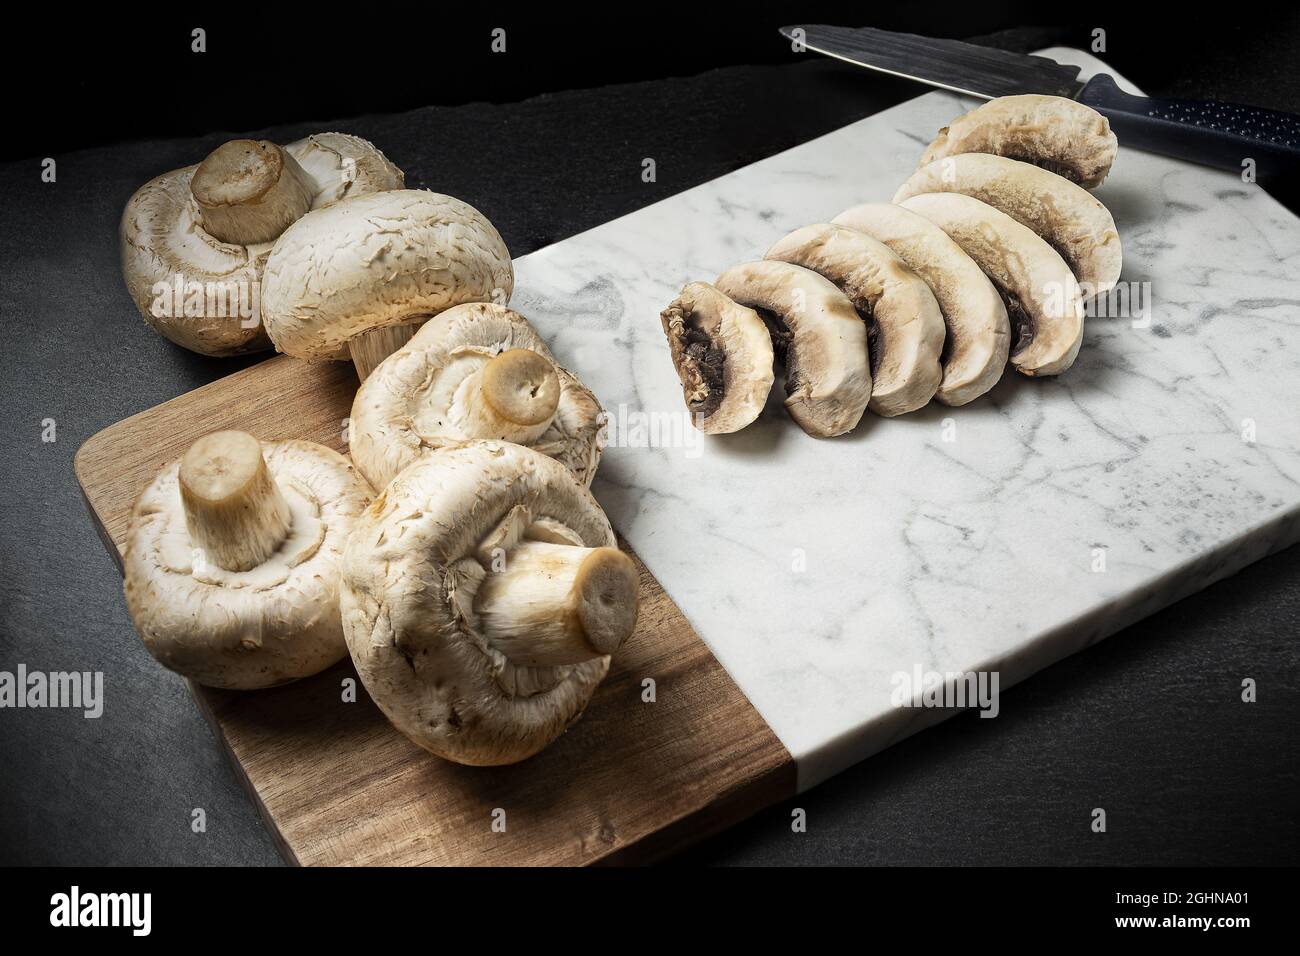 Closeup view of sliced up champignon mushrooms and whole mushrooms on a wooden board Stock Photo